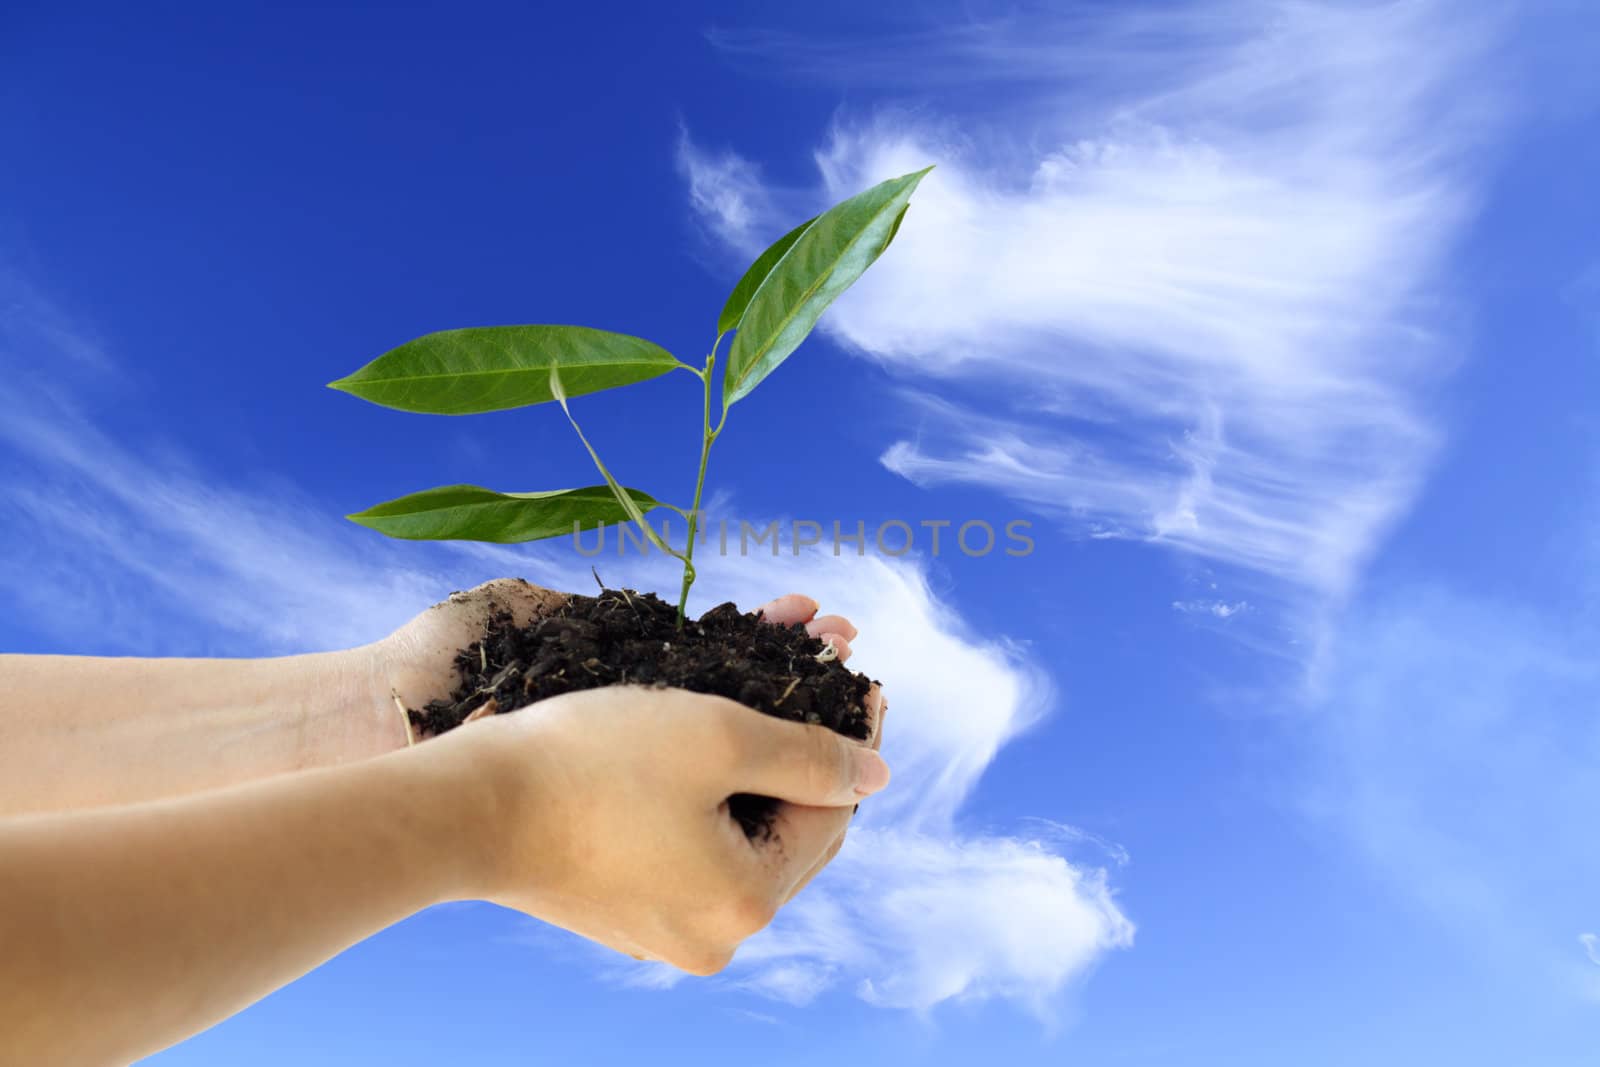 Hands holding a new plant against blue sky